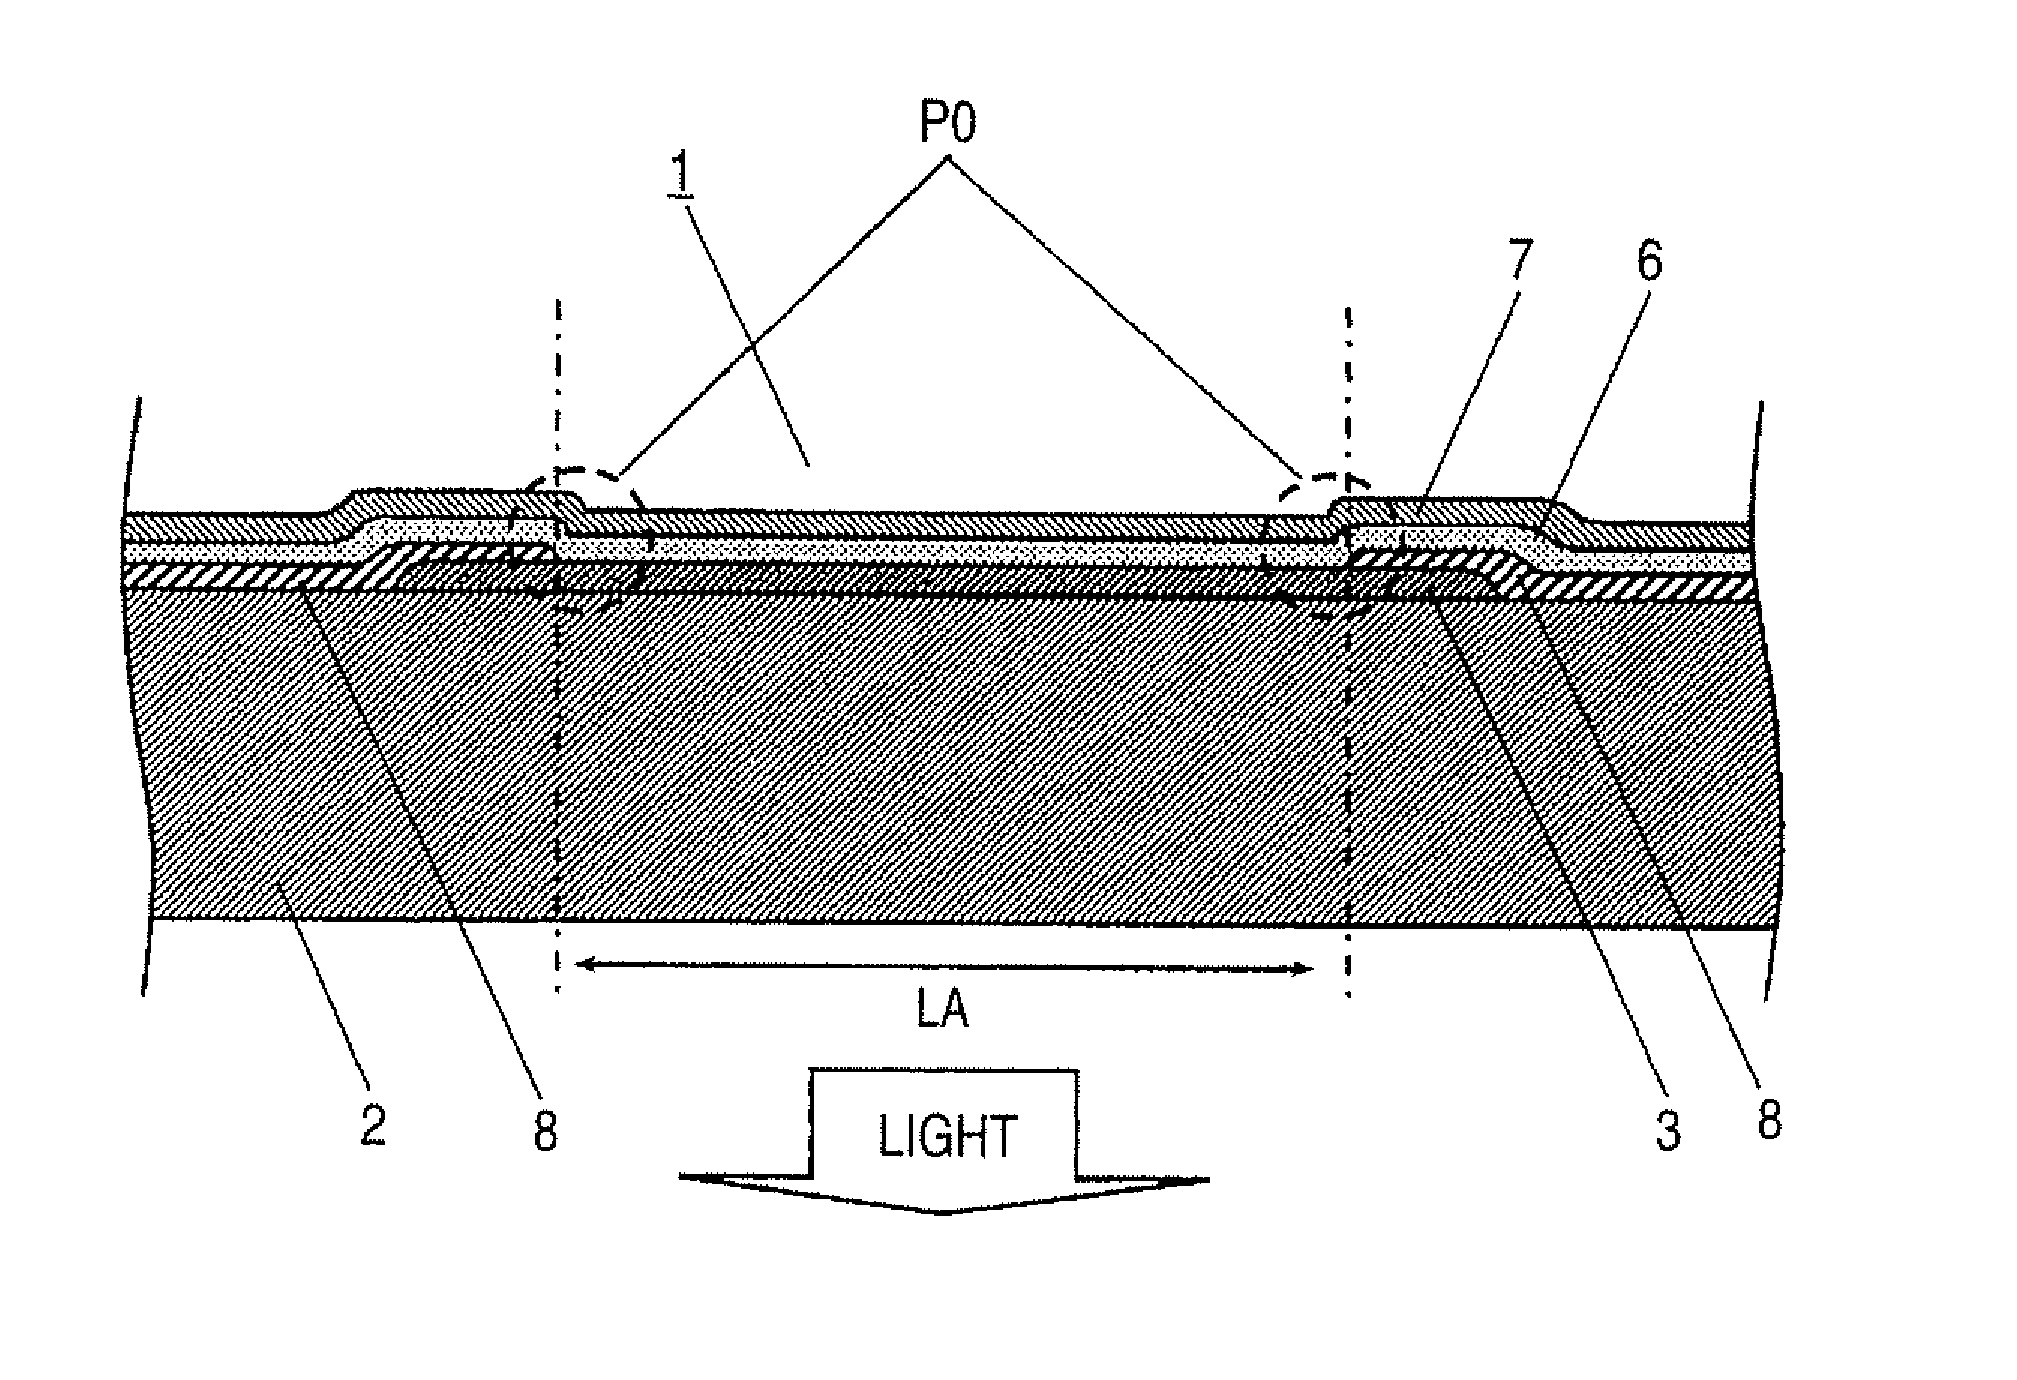 Organic electroluminescence element, exposure device and image forming